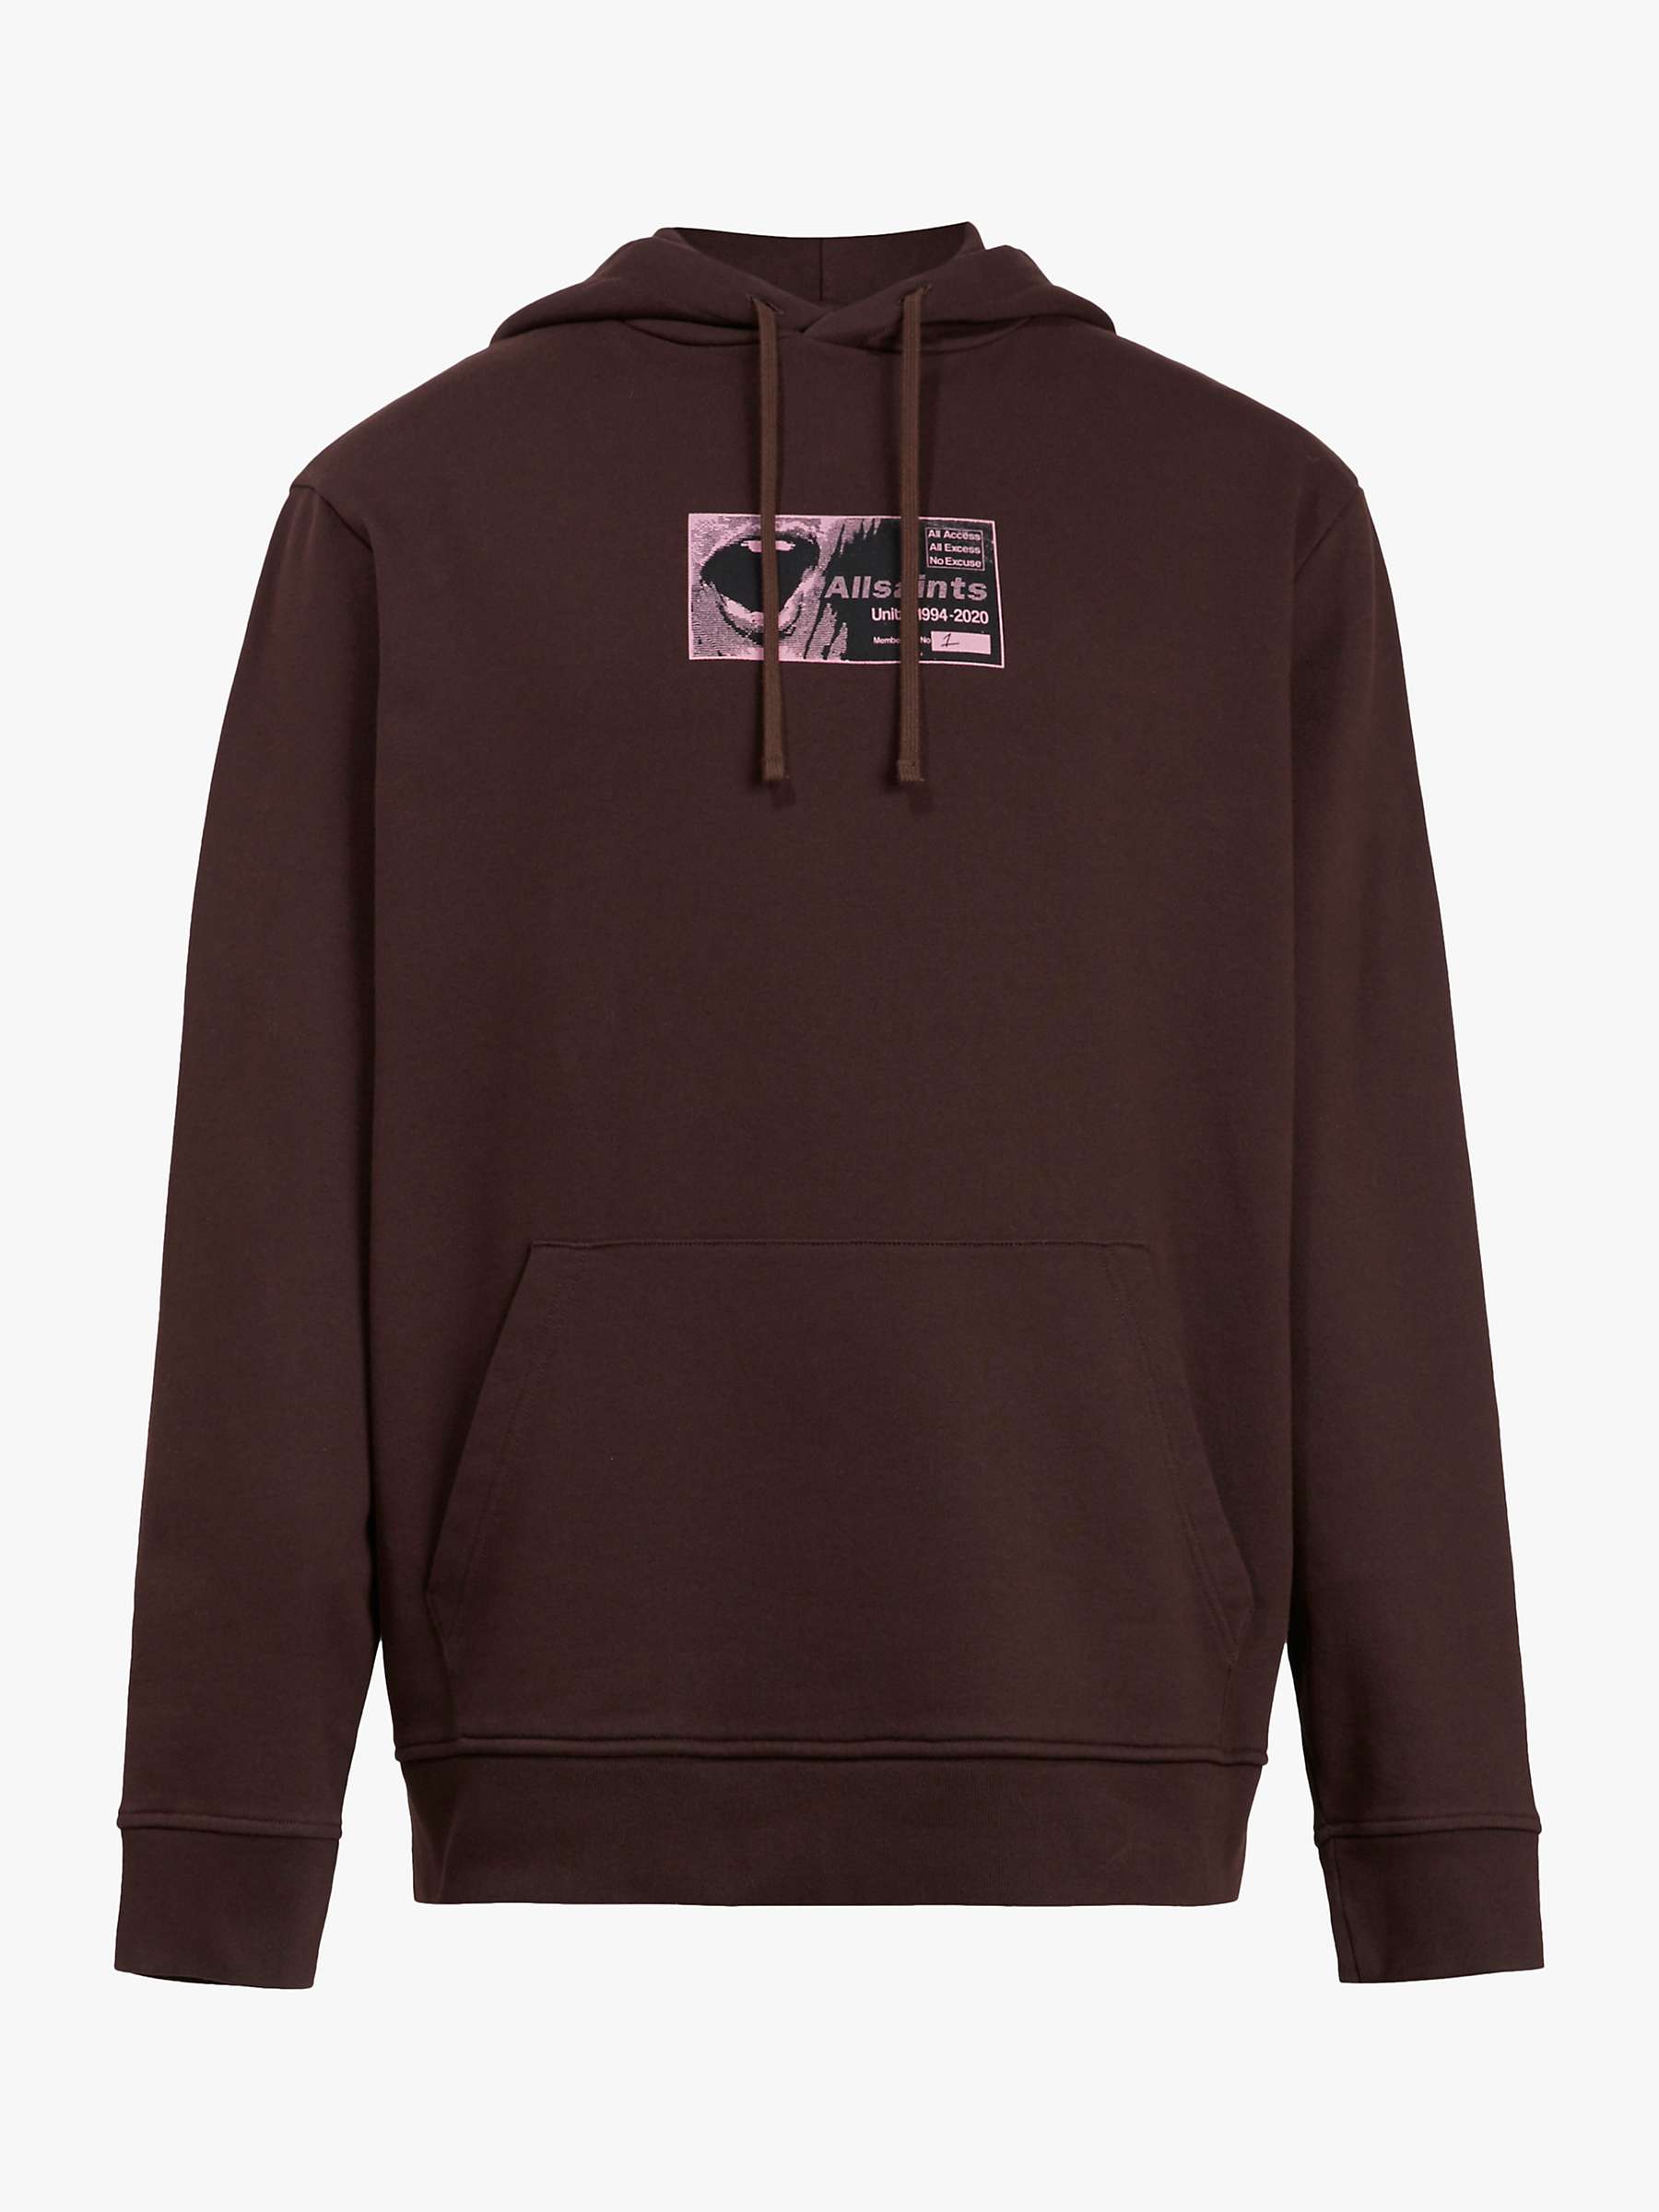 AllSaints Shout Hoodie, Oxblood Red at John Lewis & Partners